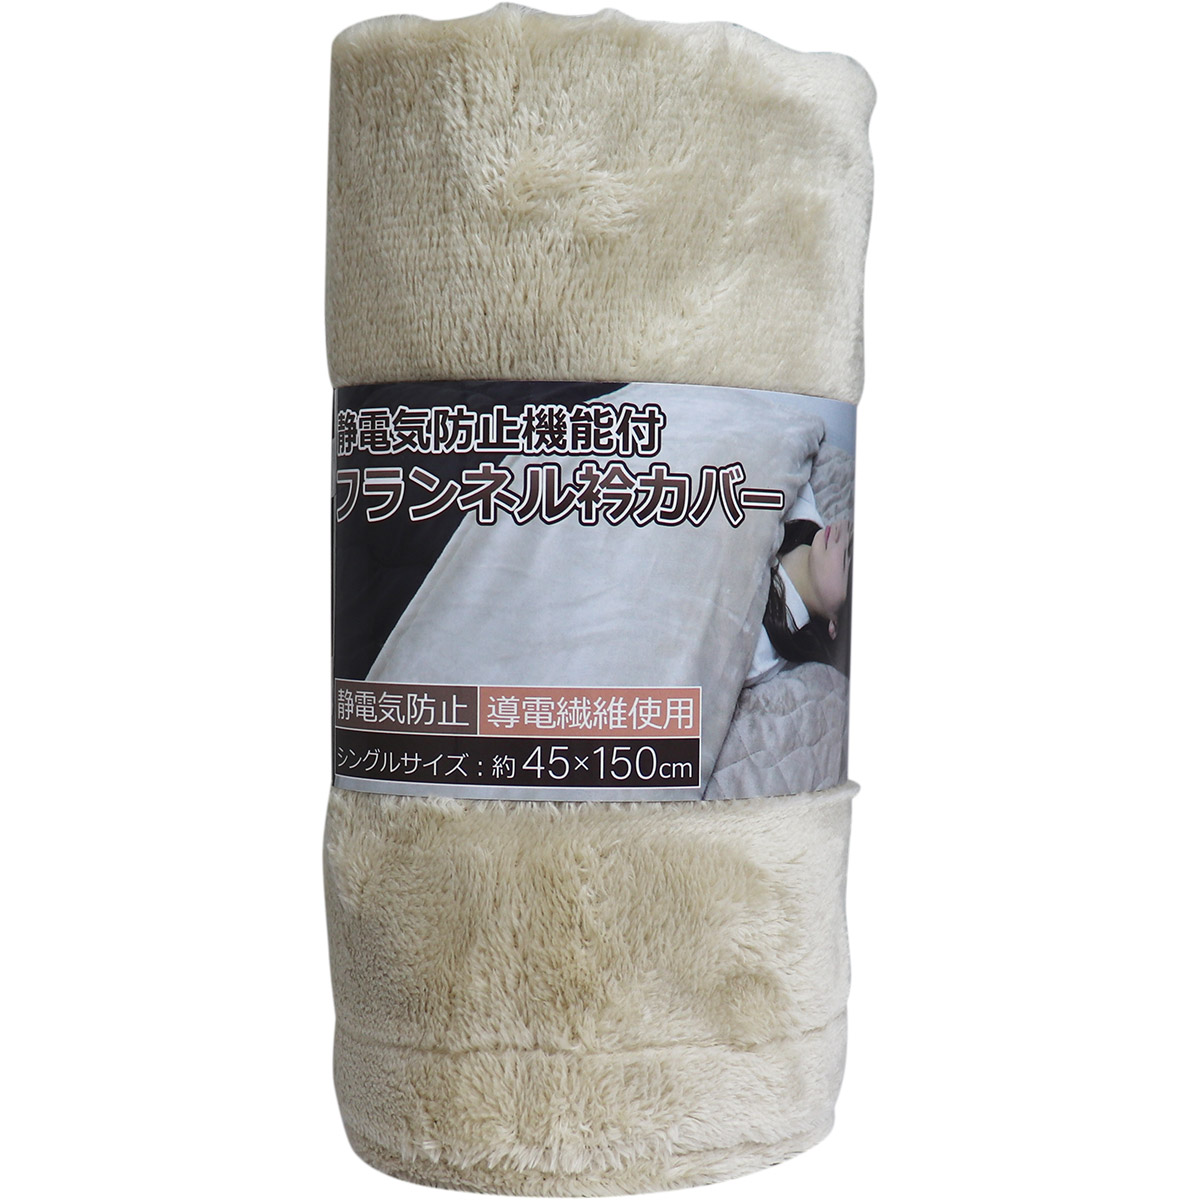 Picture of Single size Beige color Static Electricity Remover Flannel Collar For Comforter